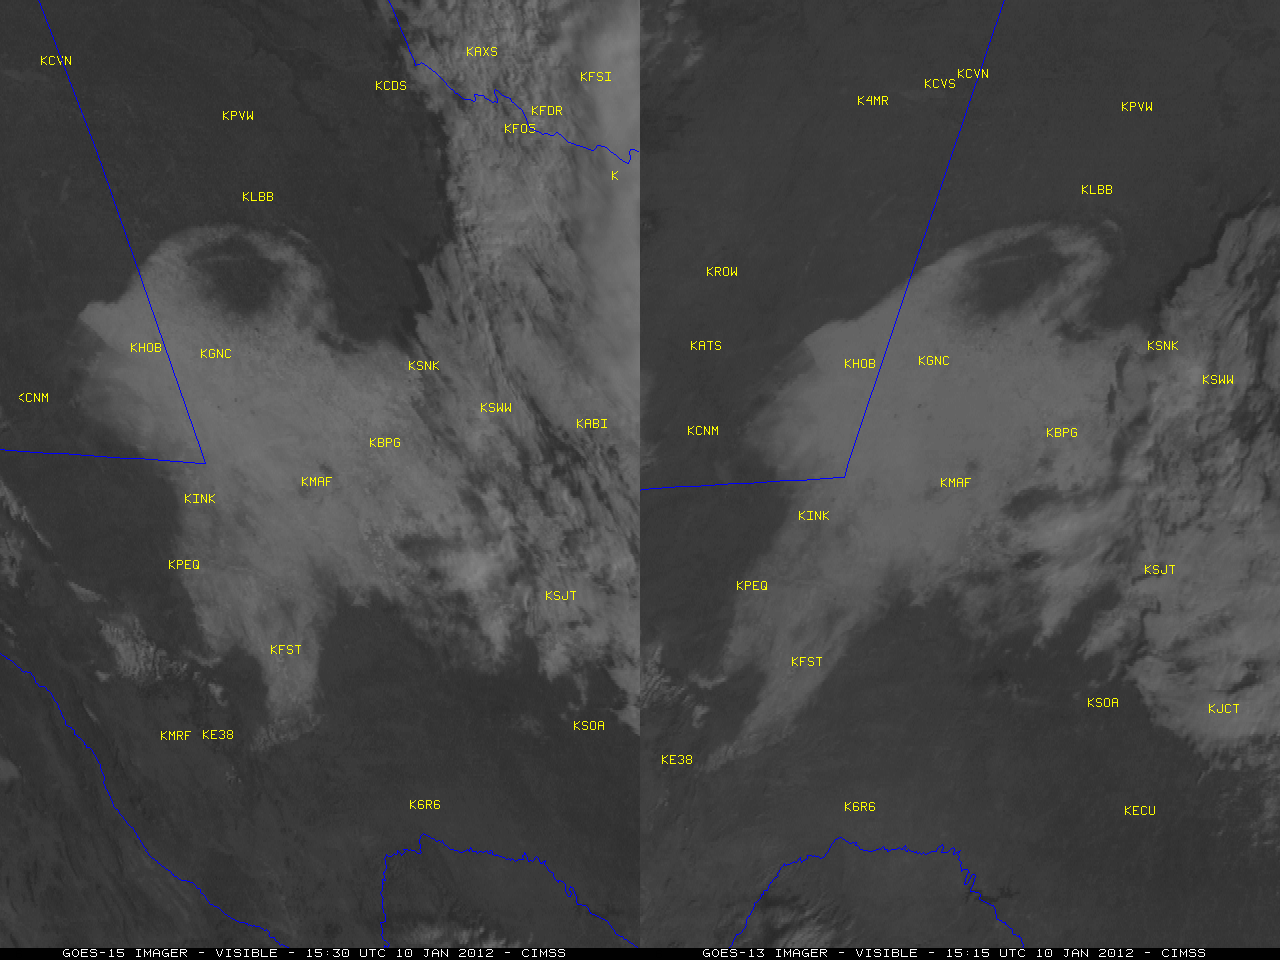 GOES-15 (GOES-West) and GOES-13 (GOES-East) 0.63 Âµm visible images (click image to play animation)